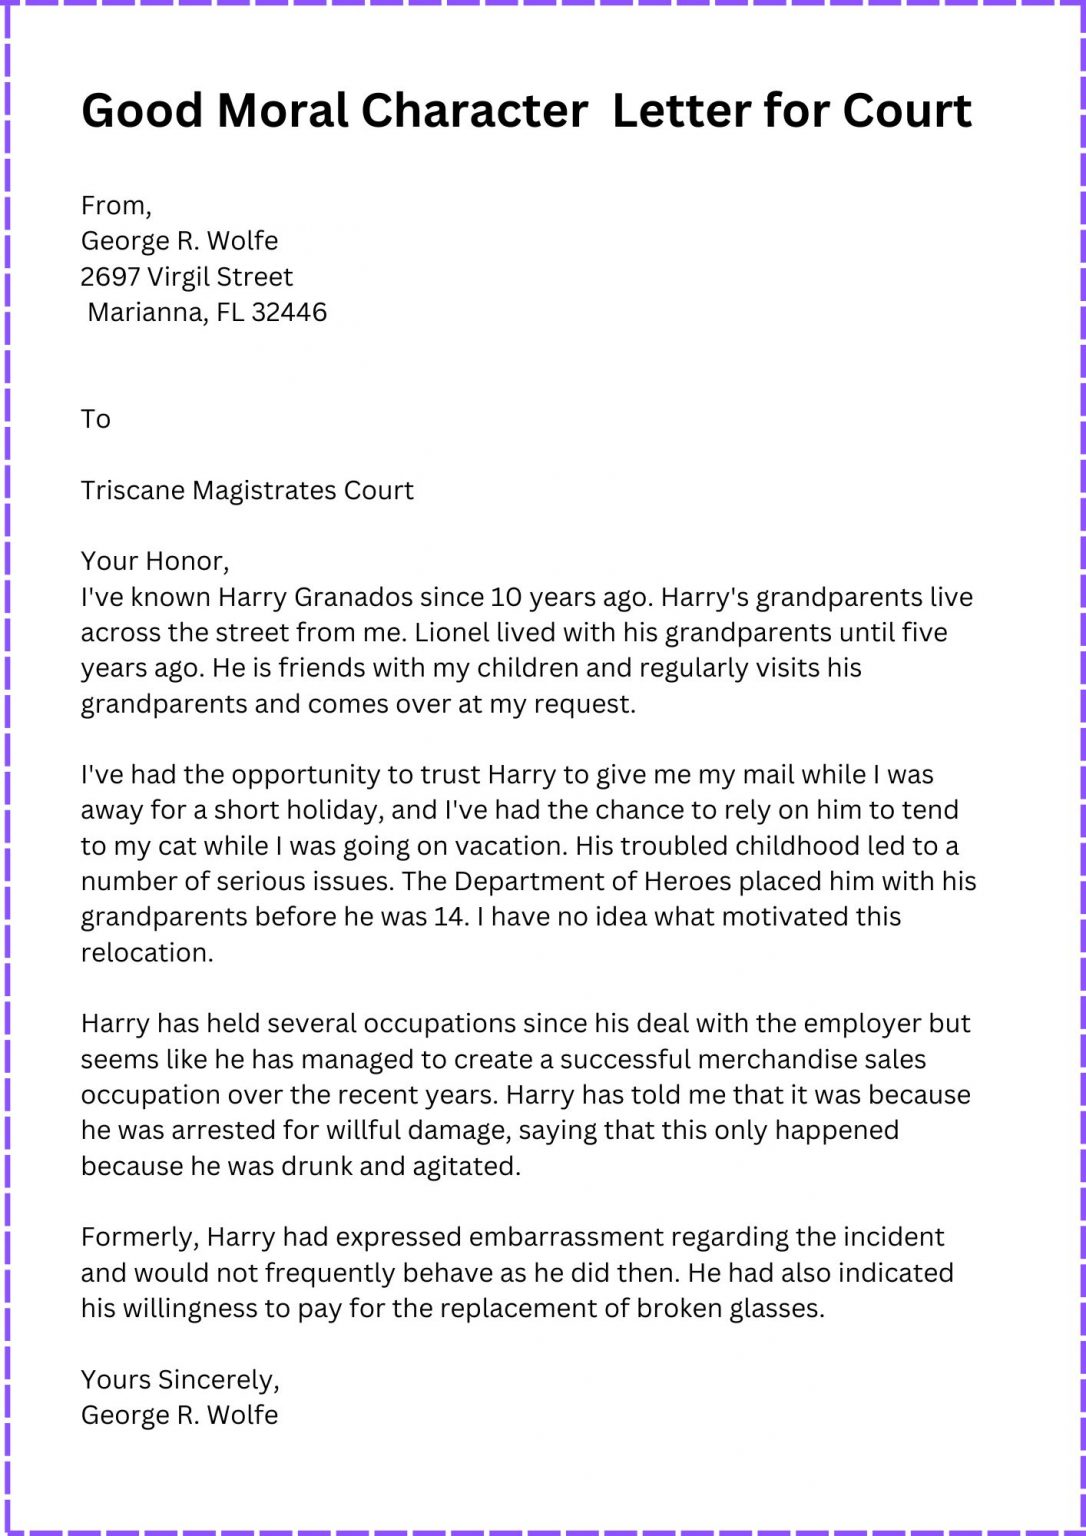 Good Moral Character Character Letter For Court.pdf 1086x1536 